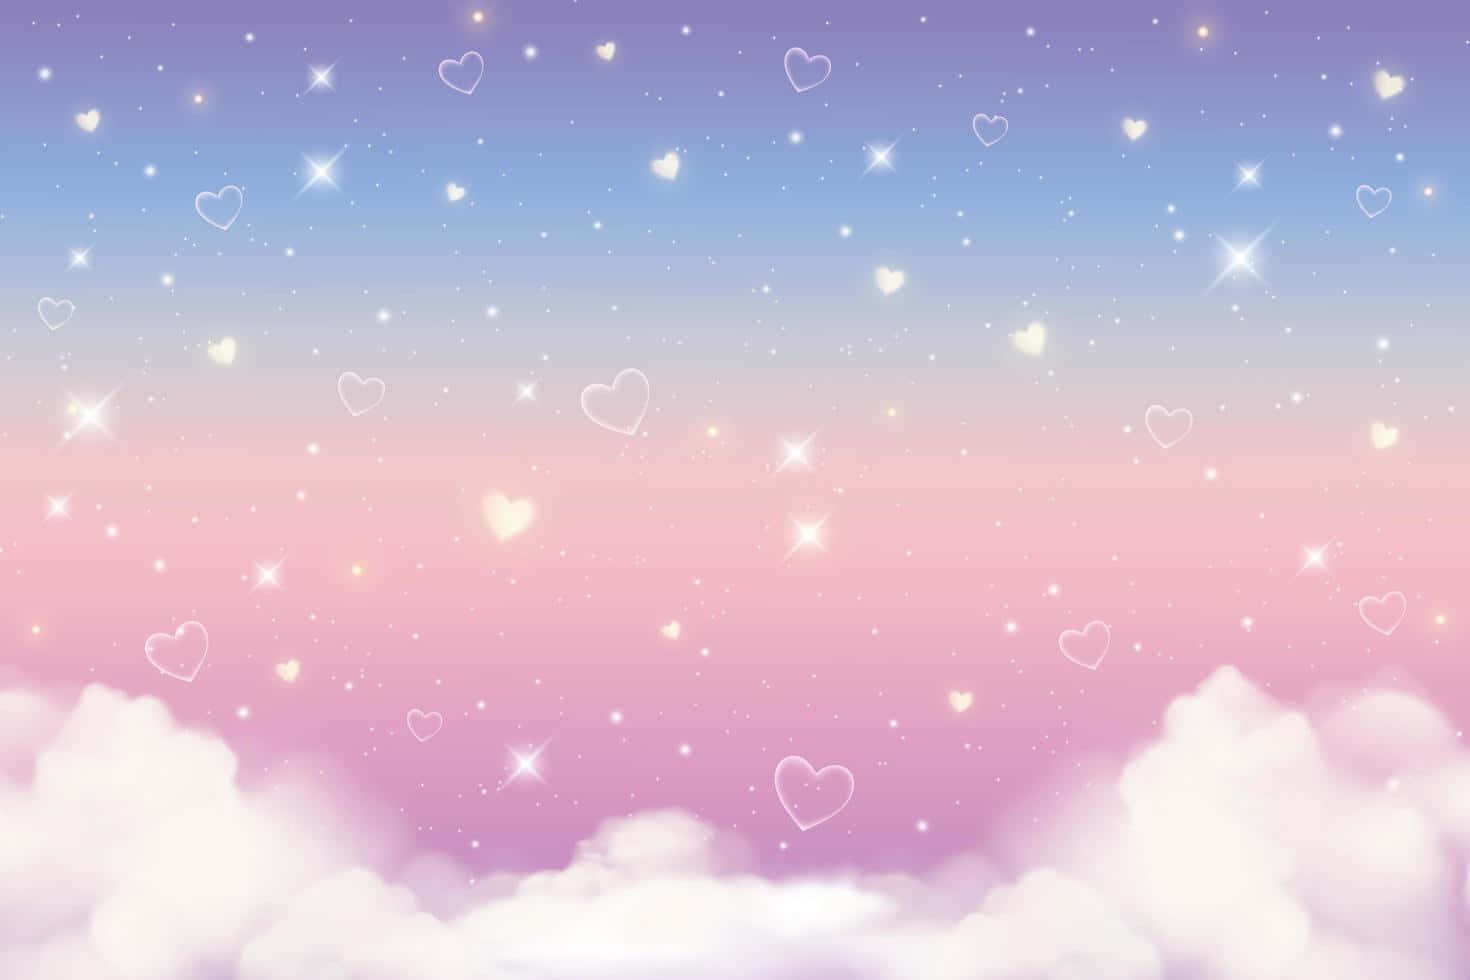 Download A Pink And Purple Sky With Clouds And Hearts | Wallpapers.com